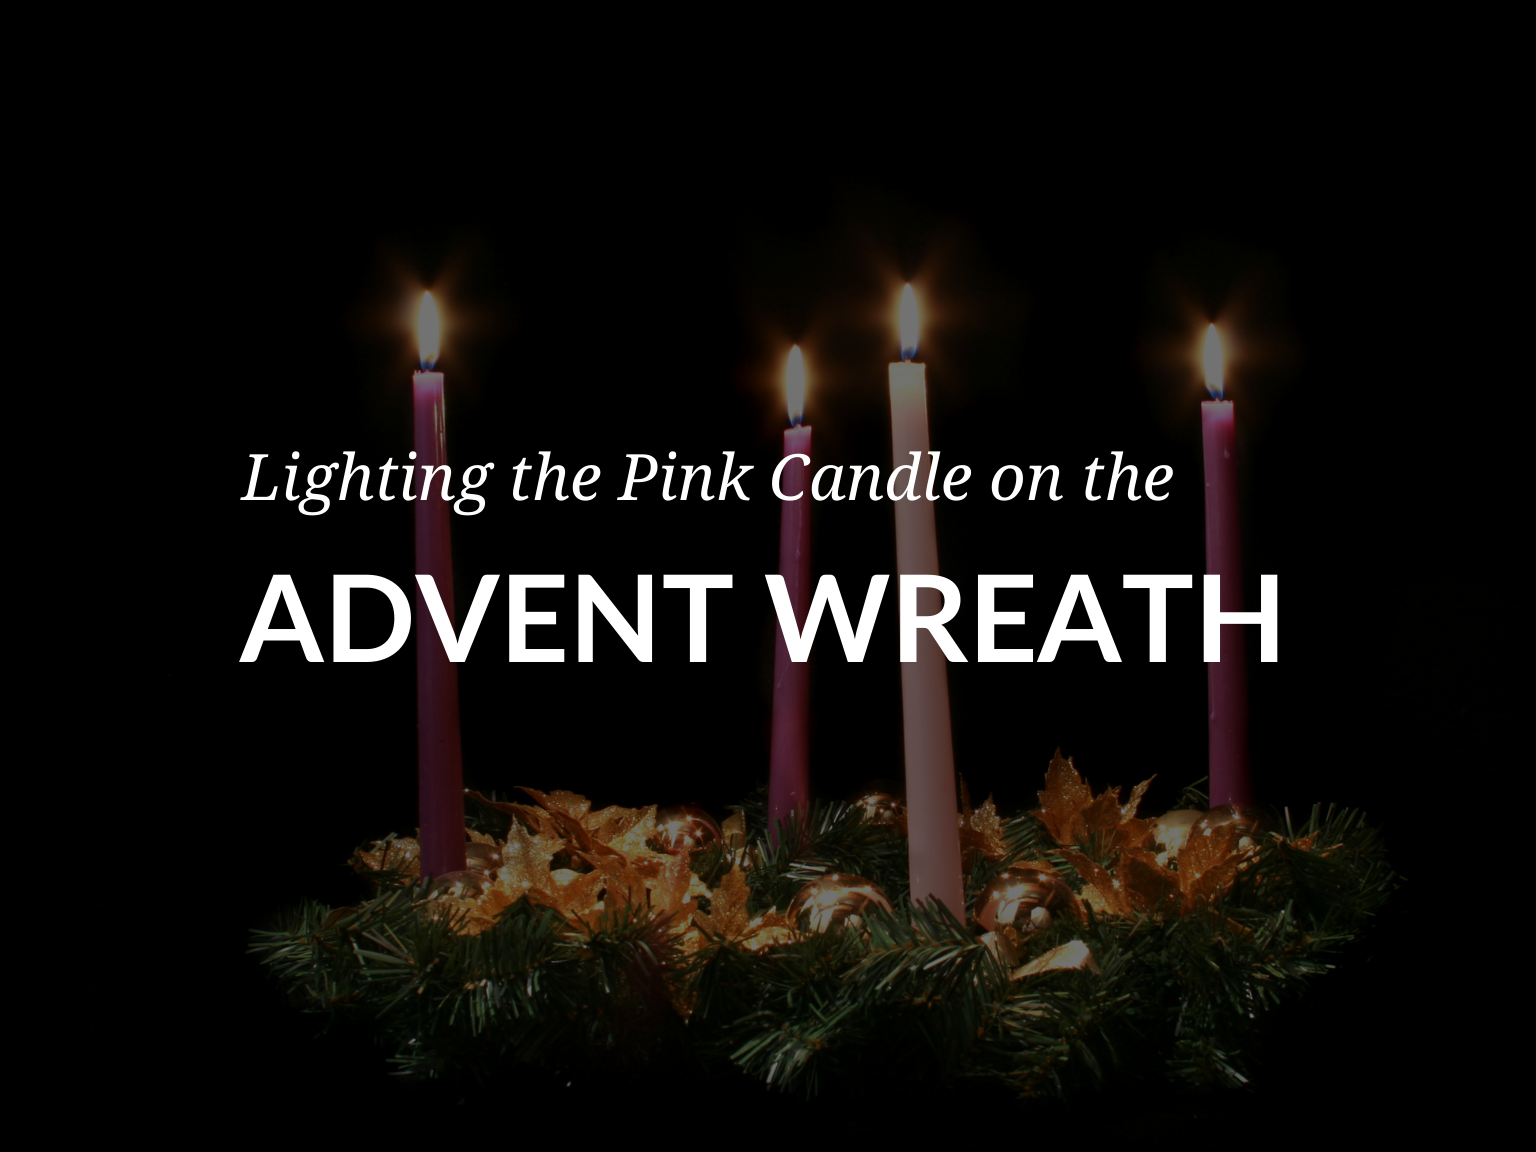 lighting-the-pink-candle-on-the-advent-wreath